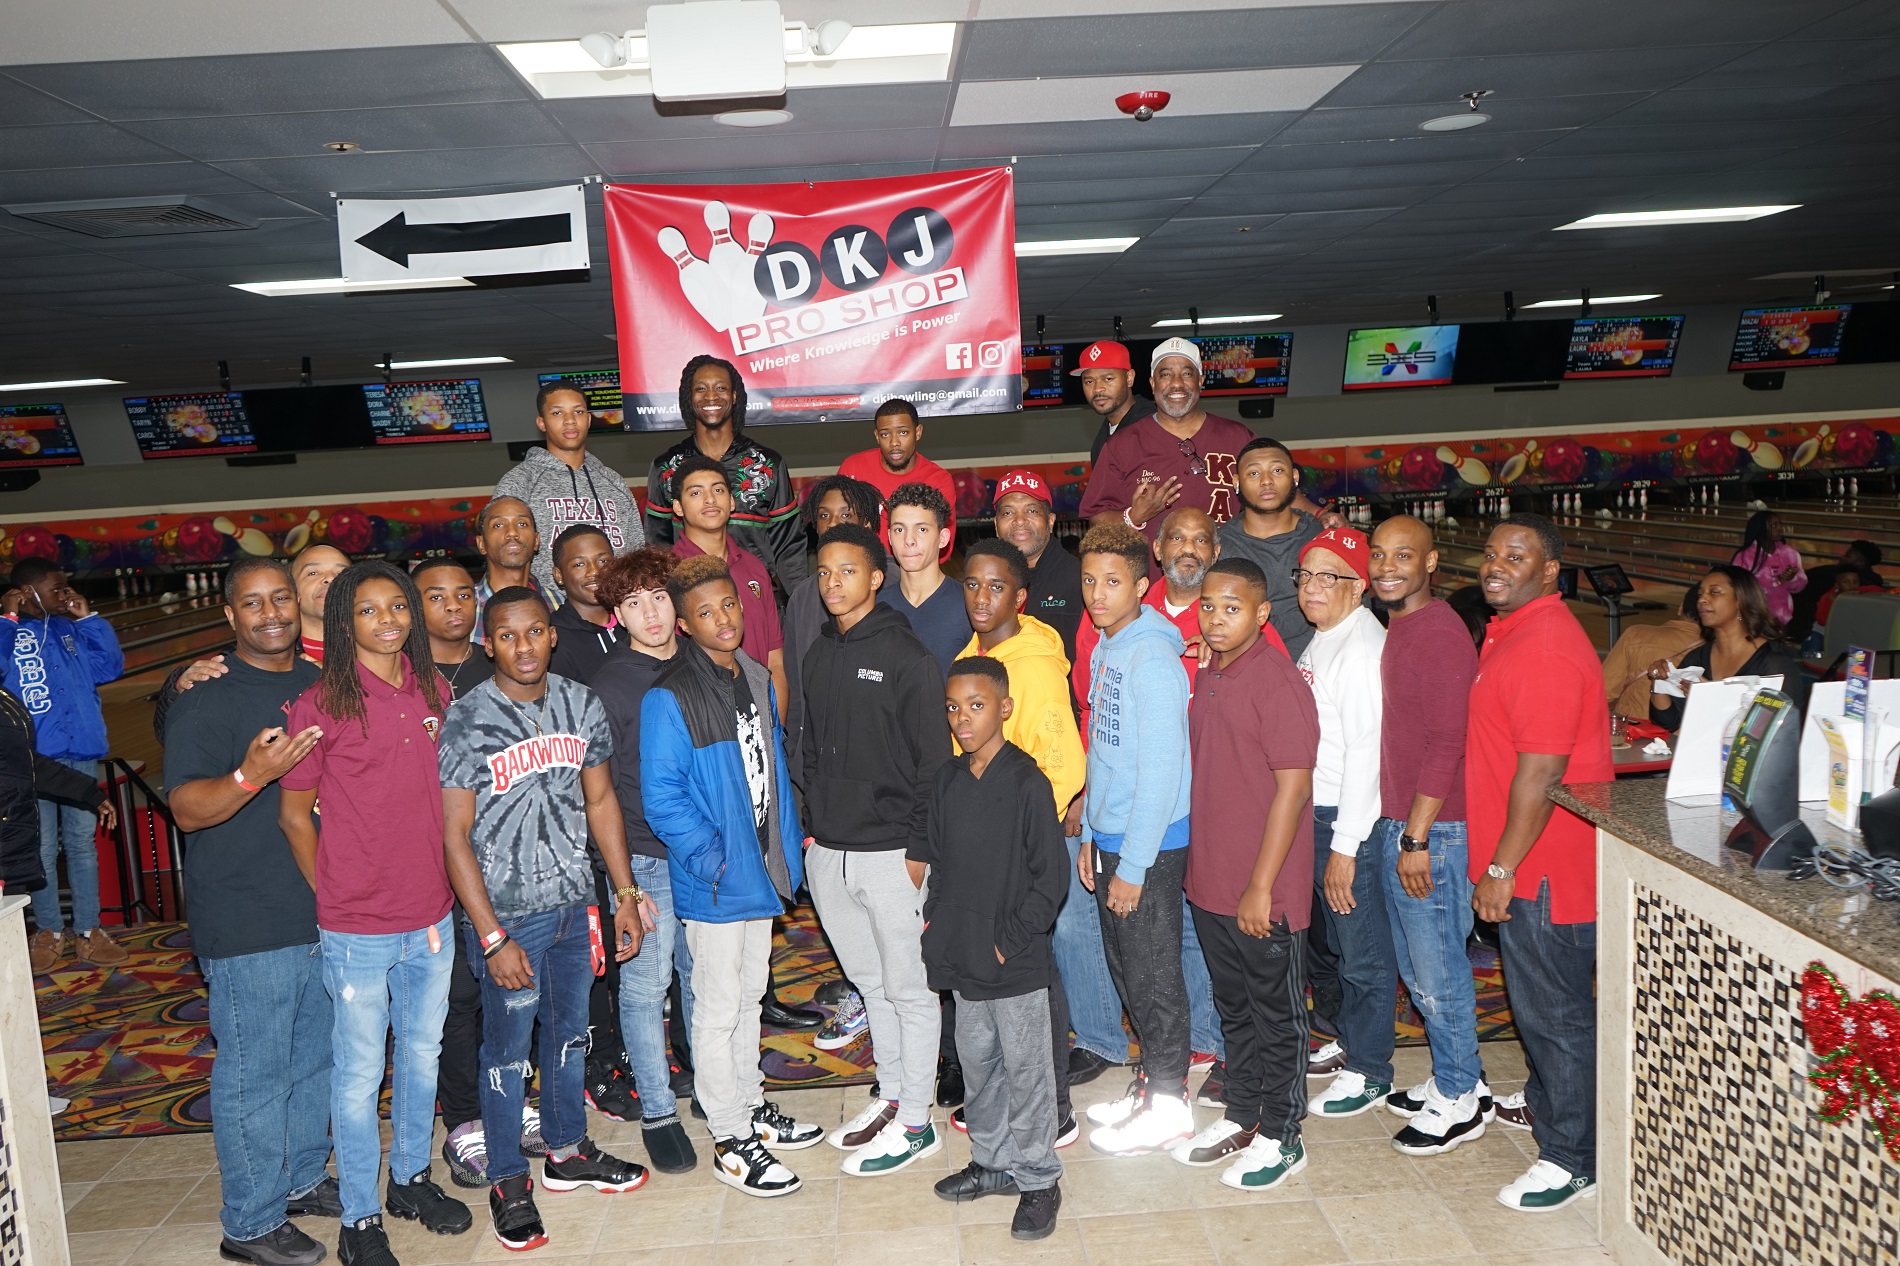 Large group of people posing for picture in bowling alley